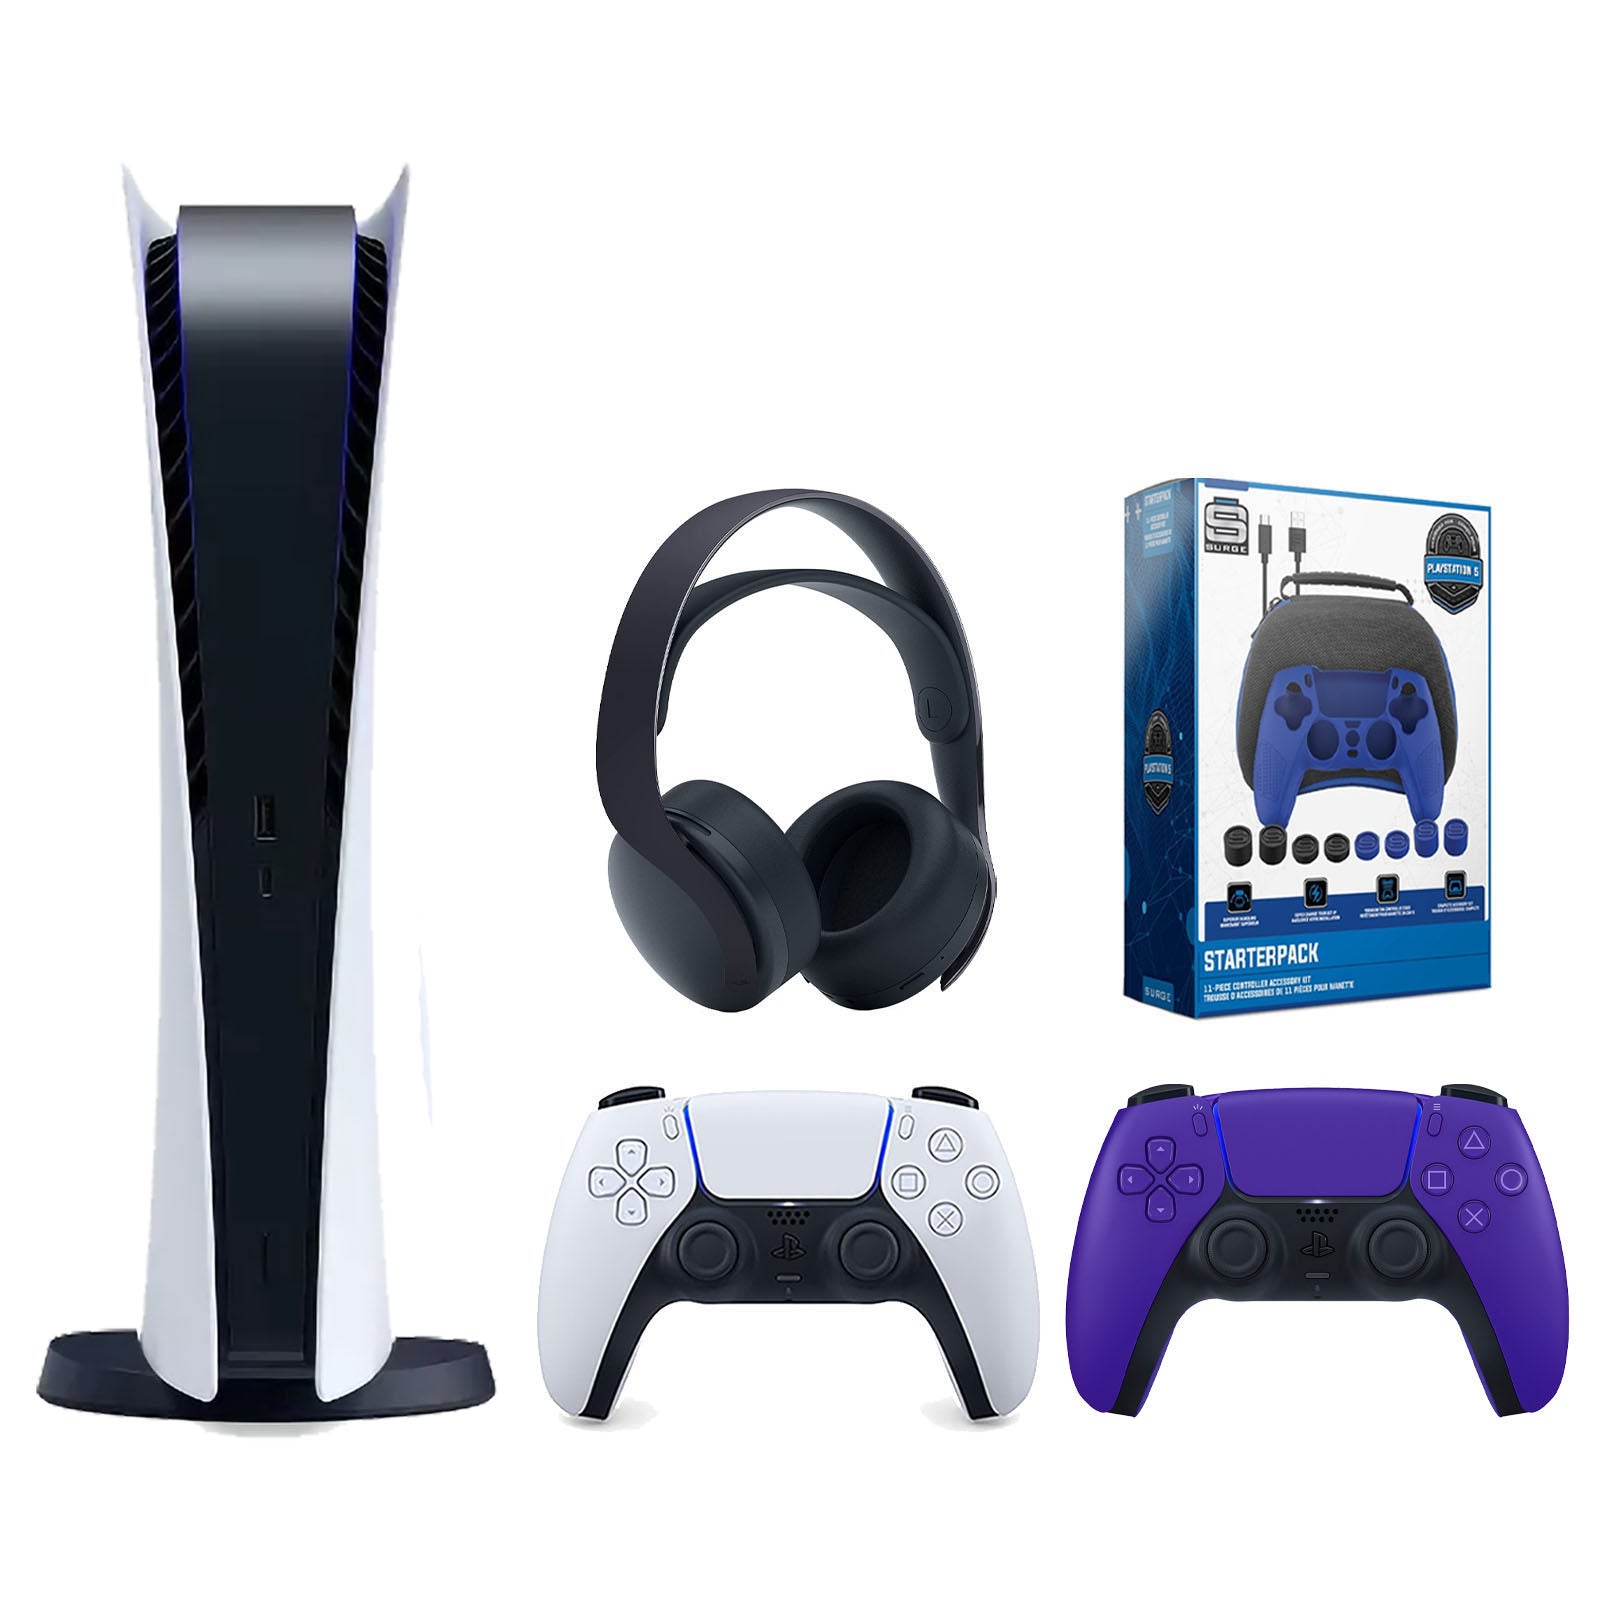 Sony Playstation 5 Digital Edition Console with Extra Purple Controller, Black PULSE 3D Headset and Surge Pro Gamer Starter Pack 11-Piece Accessory Bundle - Pro-Distributing